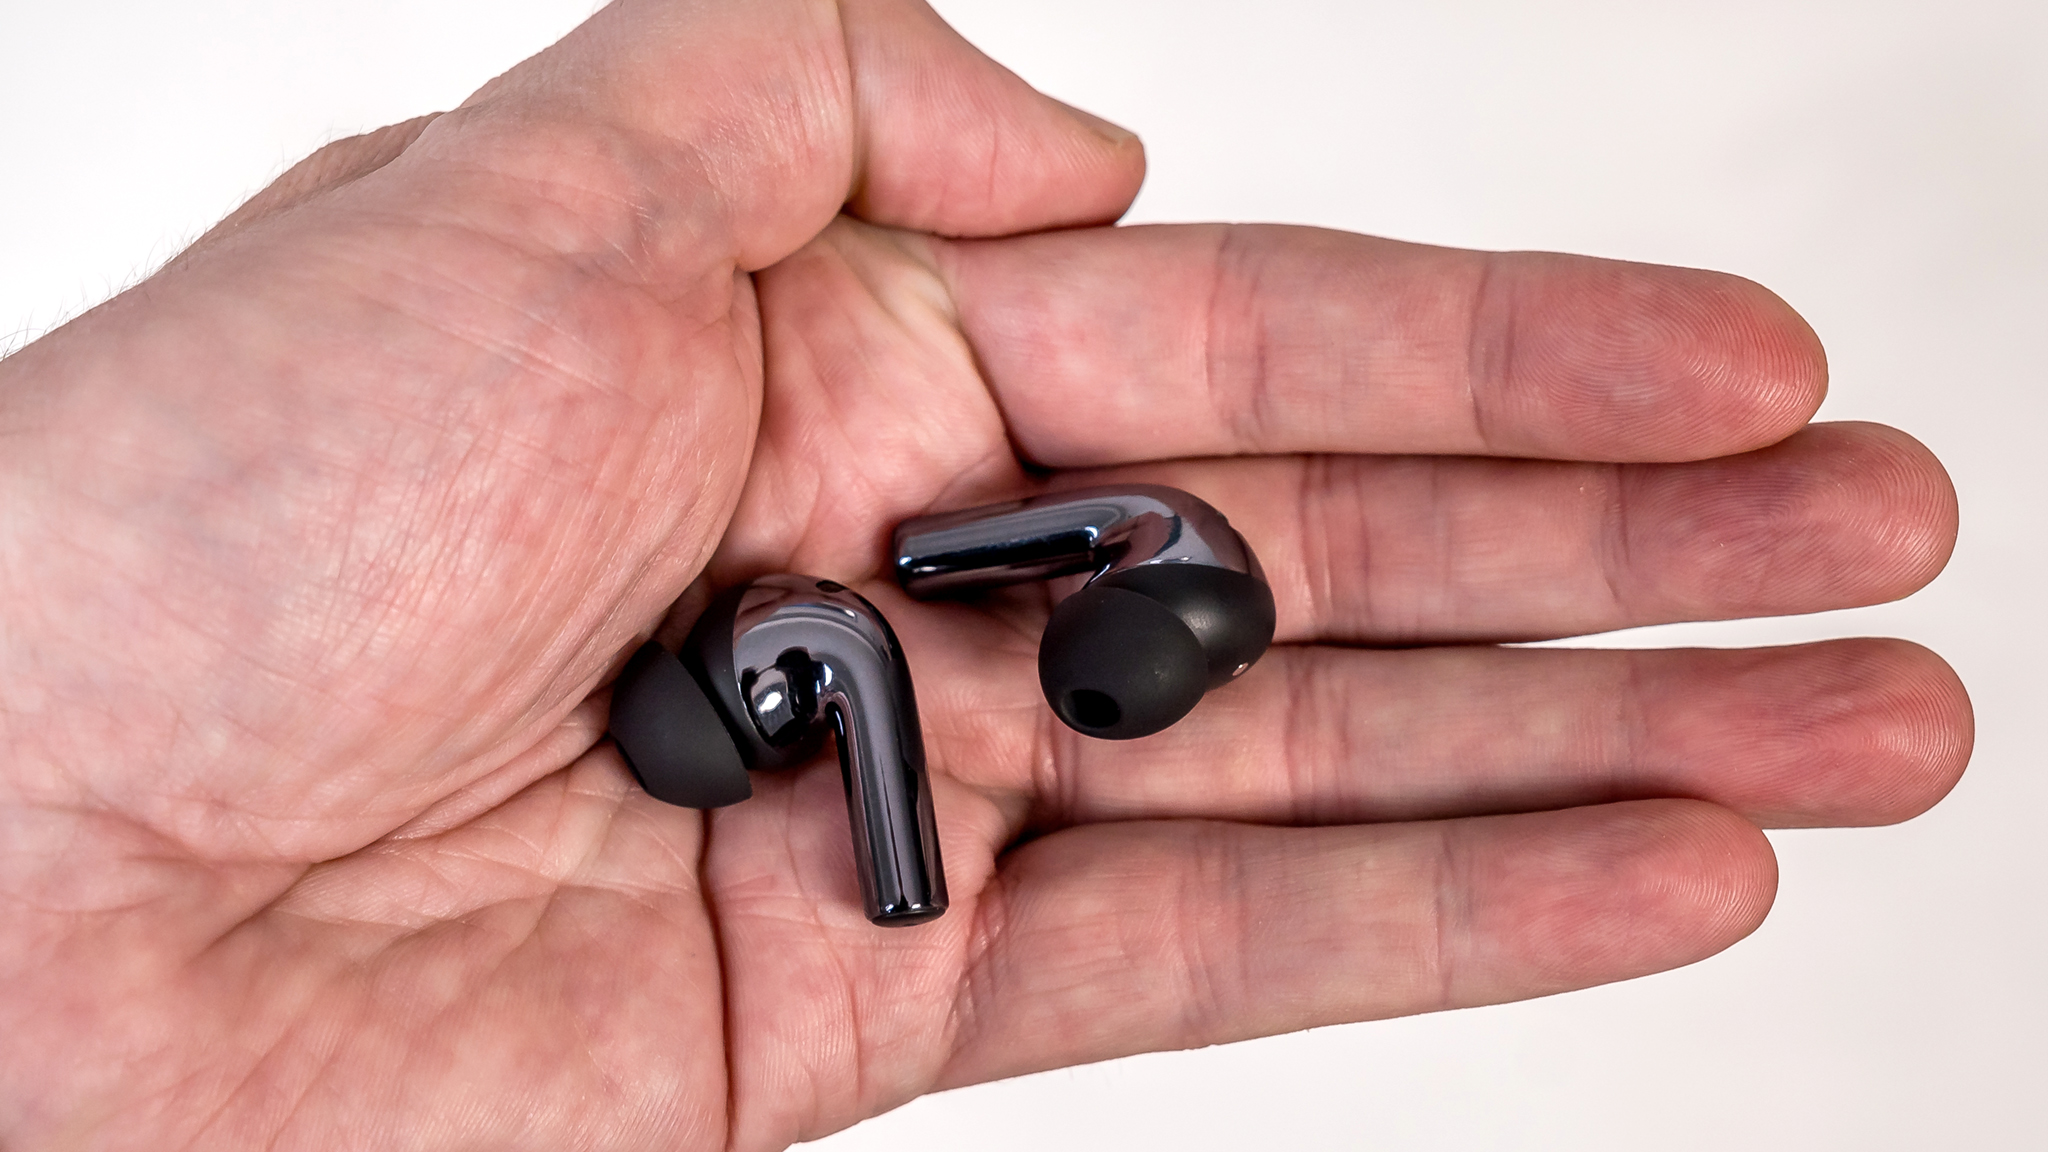 OnePlus Buds 3 earbuds in hand.